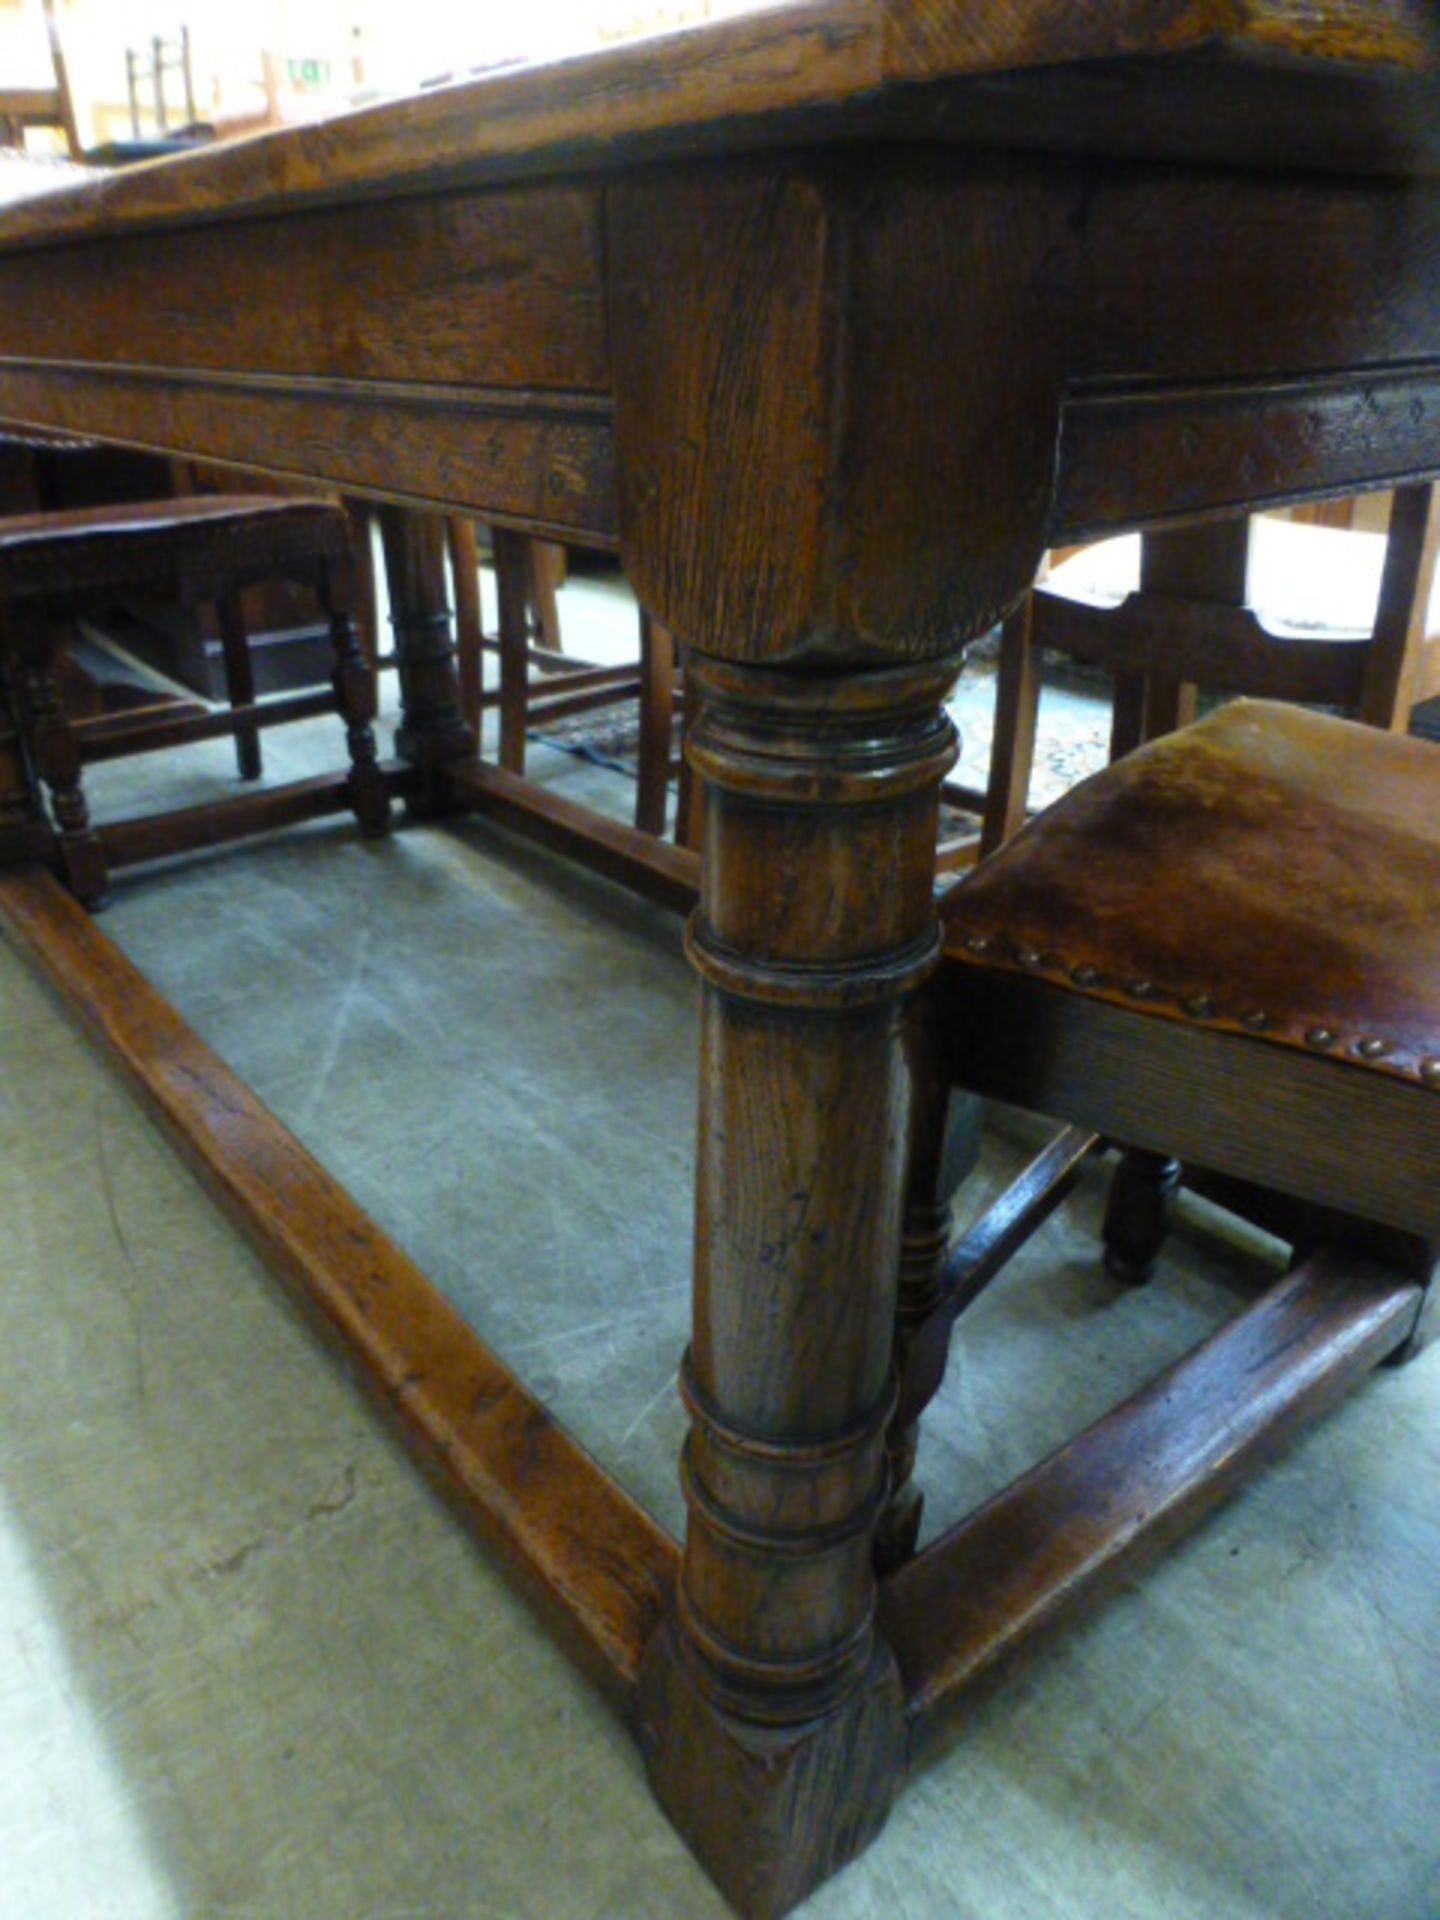 A high quality reproduction 17th century style oak refectory table, - Image 2 of 2